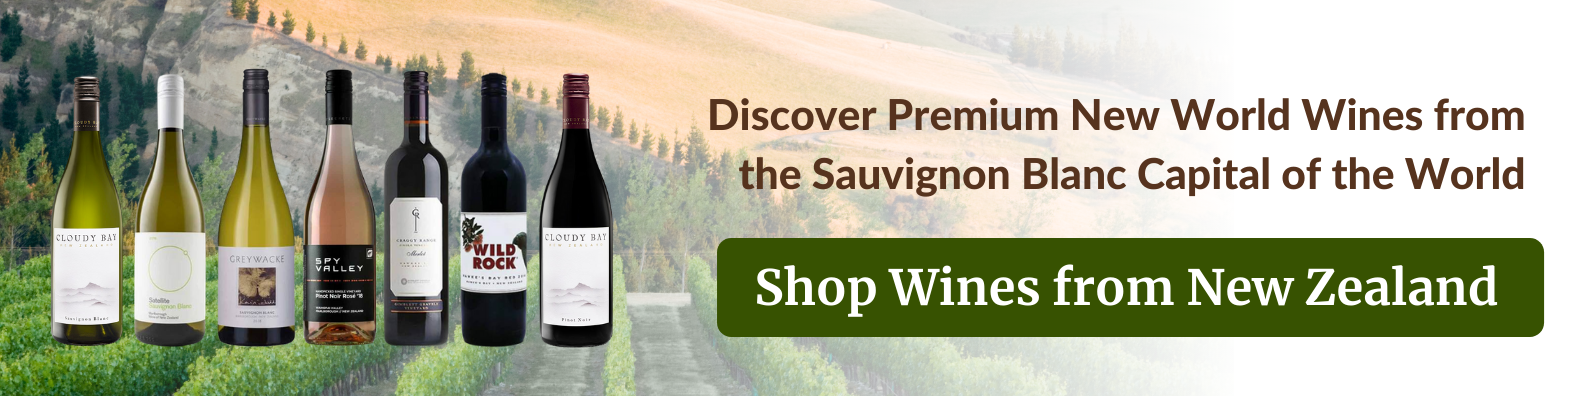 shop new zealand wines at best prices in philippines